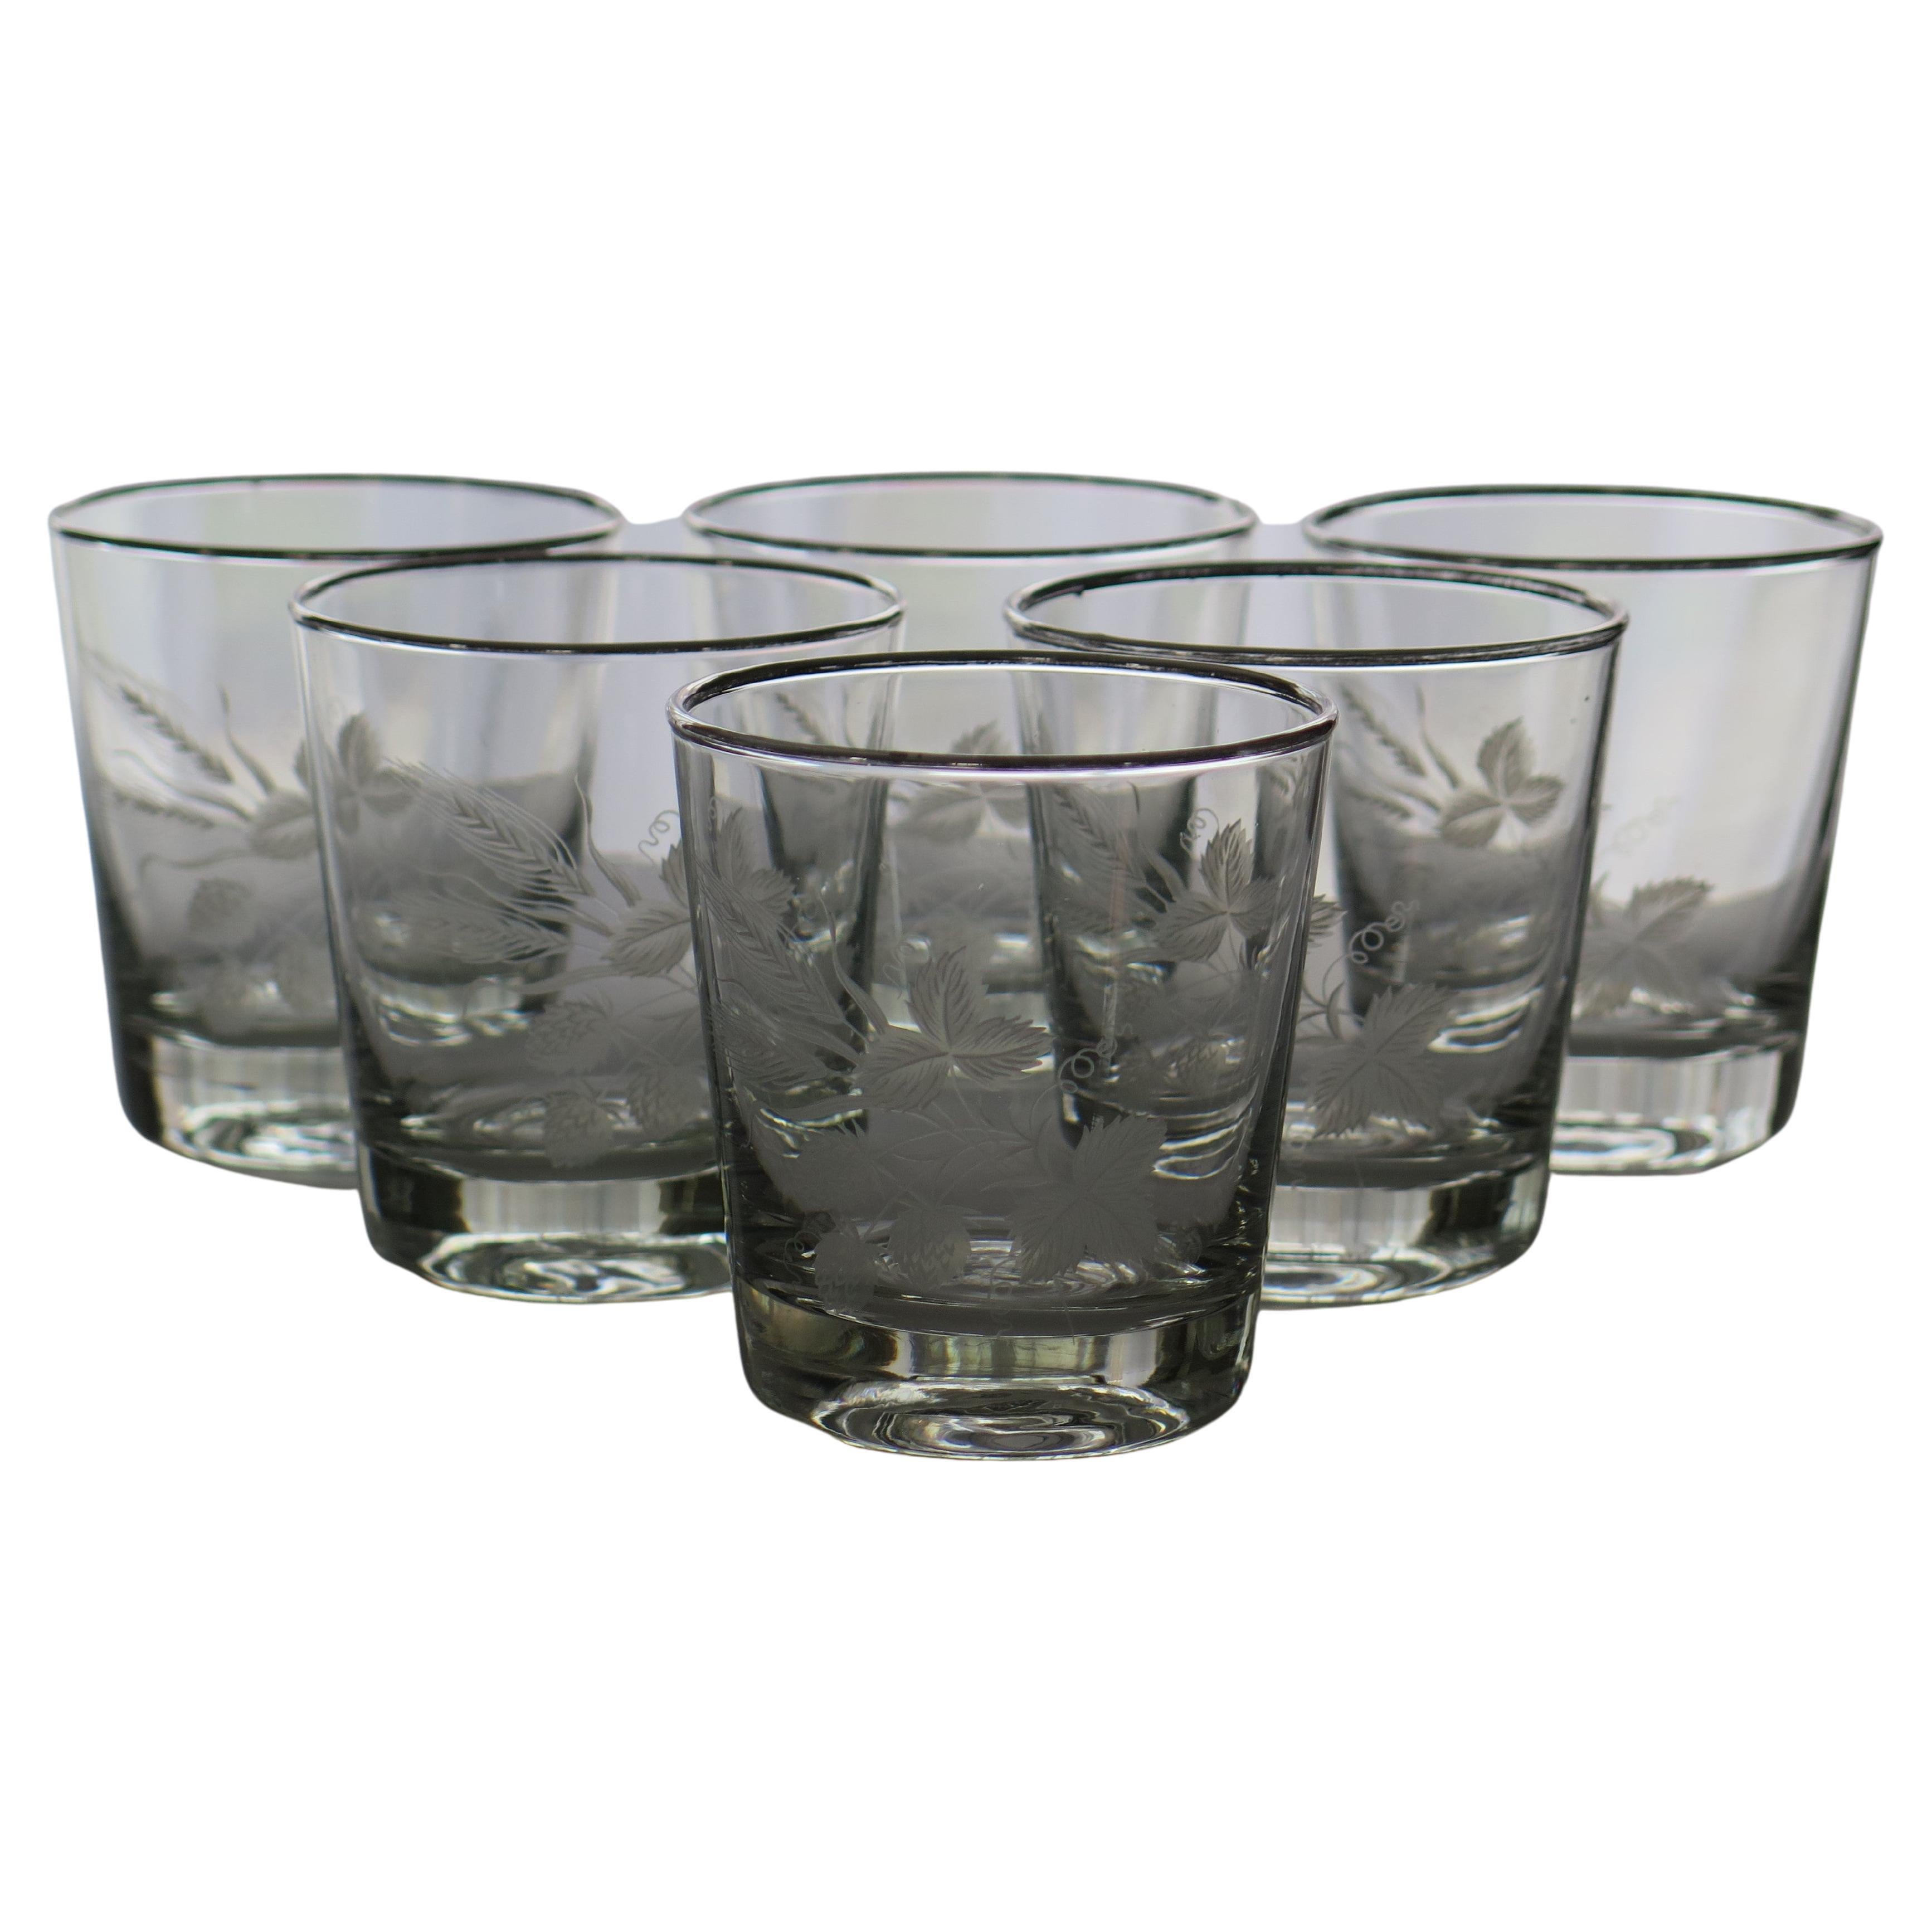 Set of SIX Whisky Drinking Glasses Barley Decoration & Silver Rim, circa 1950s For Sale